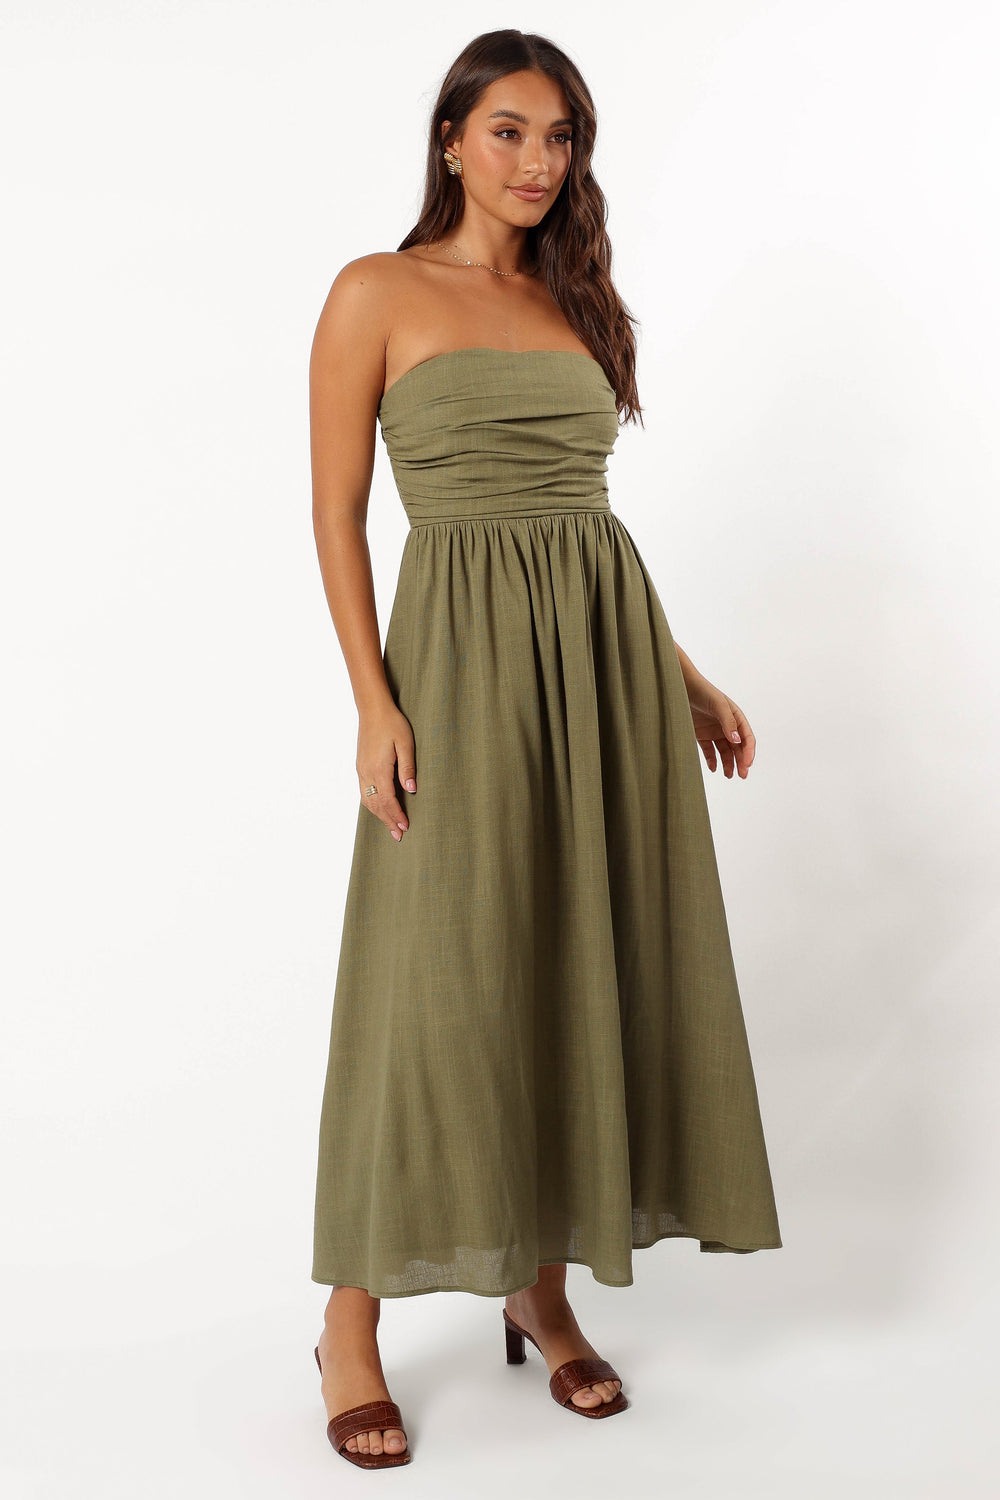 Petal and Pup USA DRESSES Kayt Strapless Dress - Olive Green